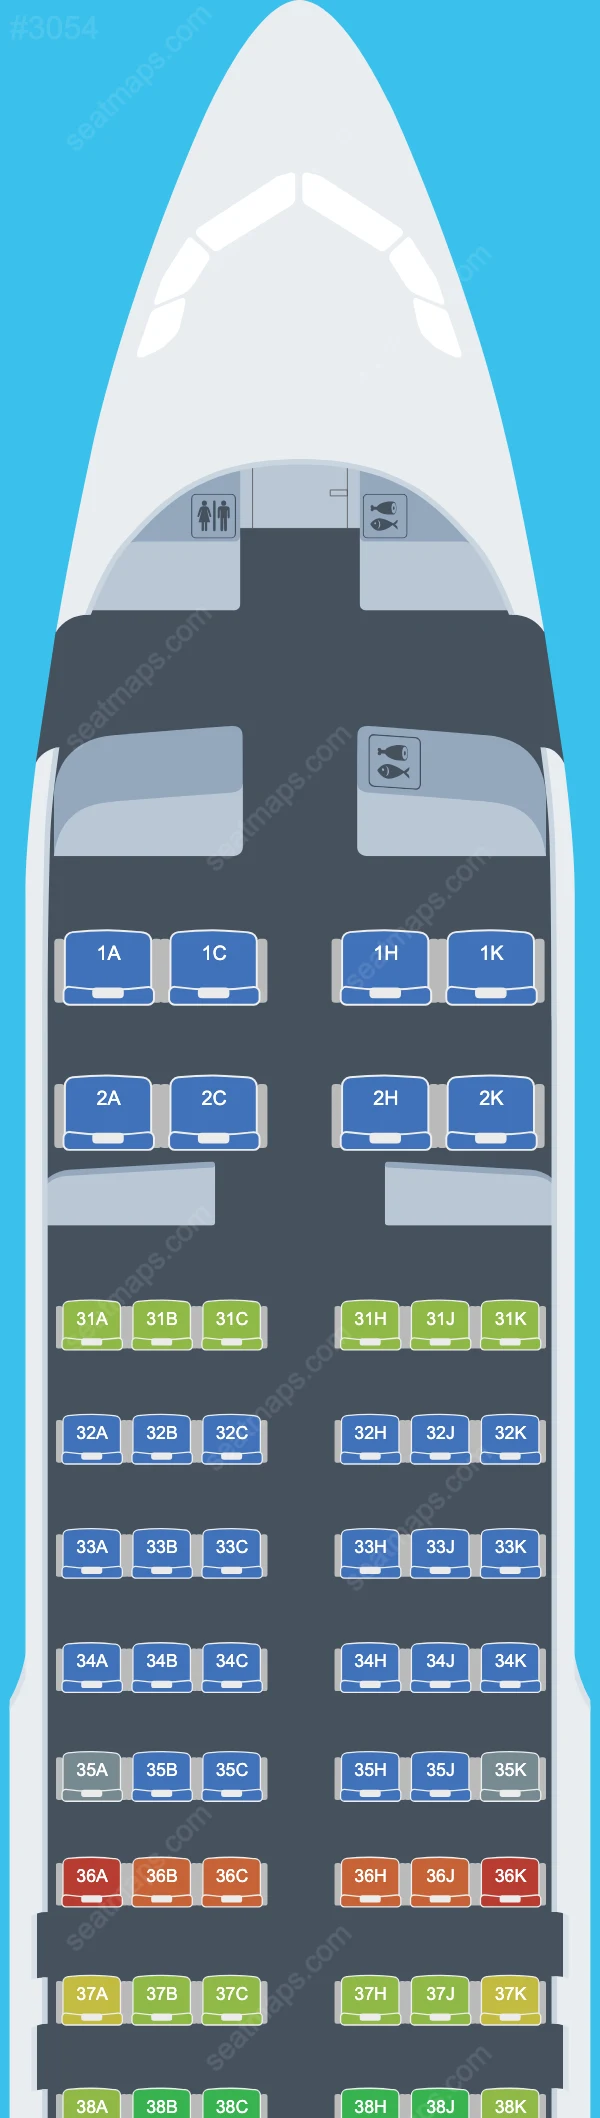 China Southern Airbus A320 Seat Maps A320-200 V.4